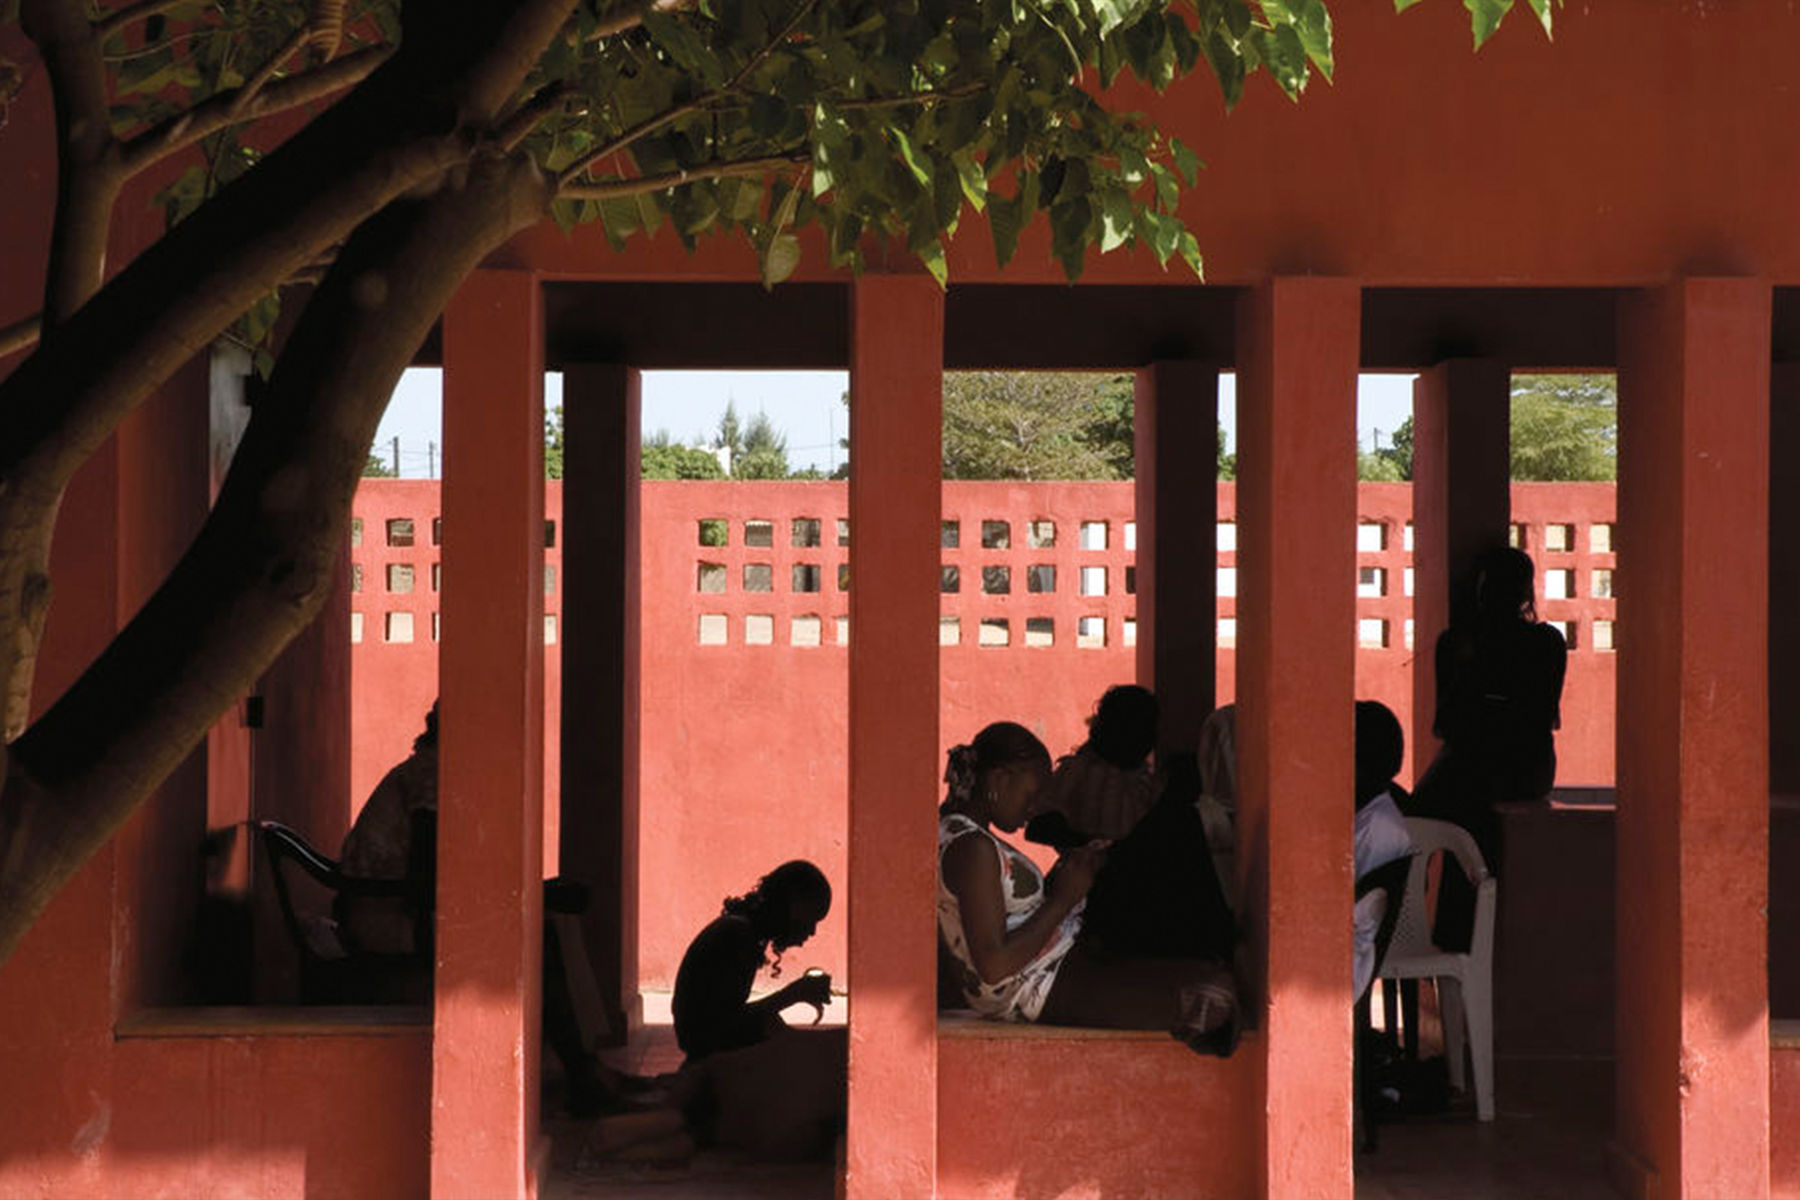 he women's centre designed by Saija Hollmén, Jenni Reuter and Helena Sandman was completed in the city of Rufisque in Senegal in 2001. Photo: Helena Sandman